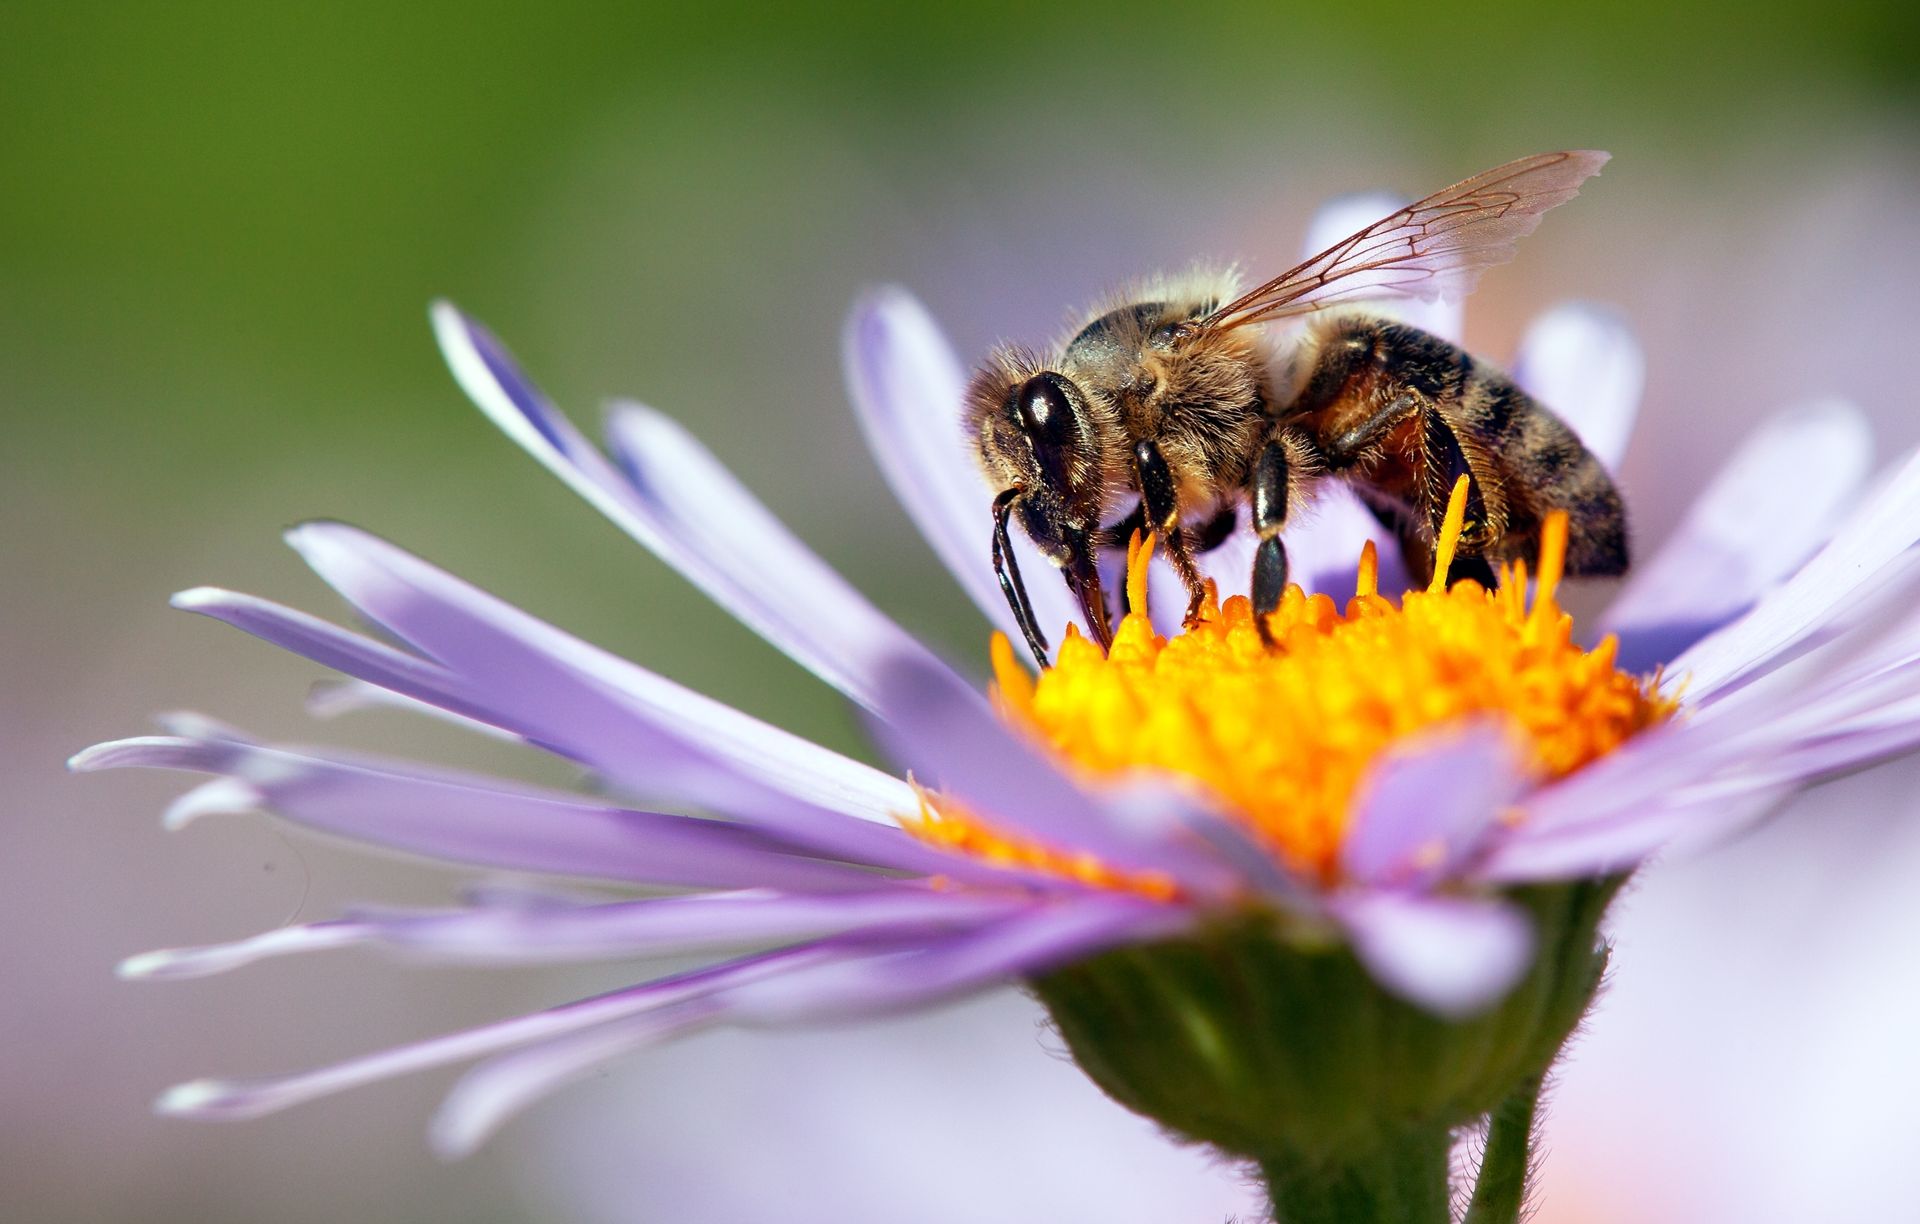 The Benefits of Bees